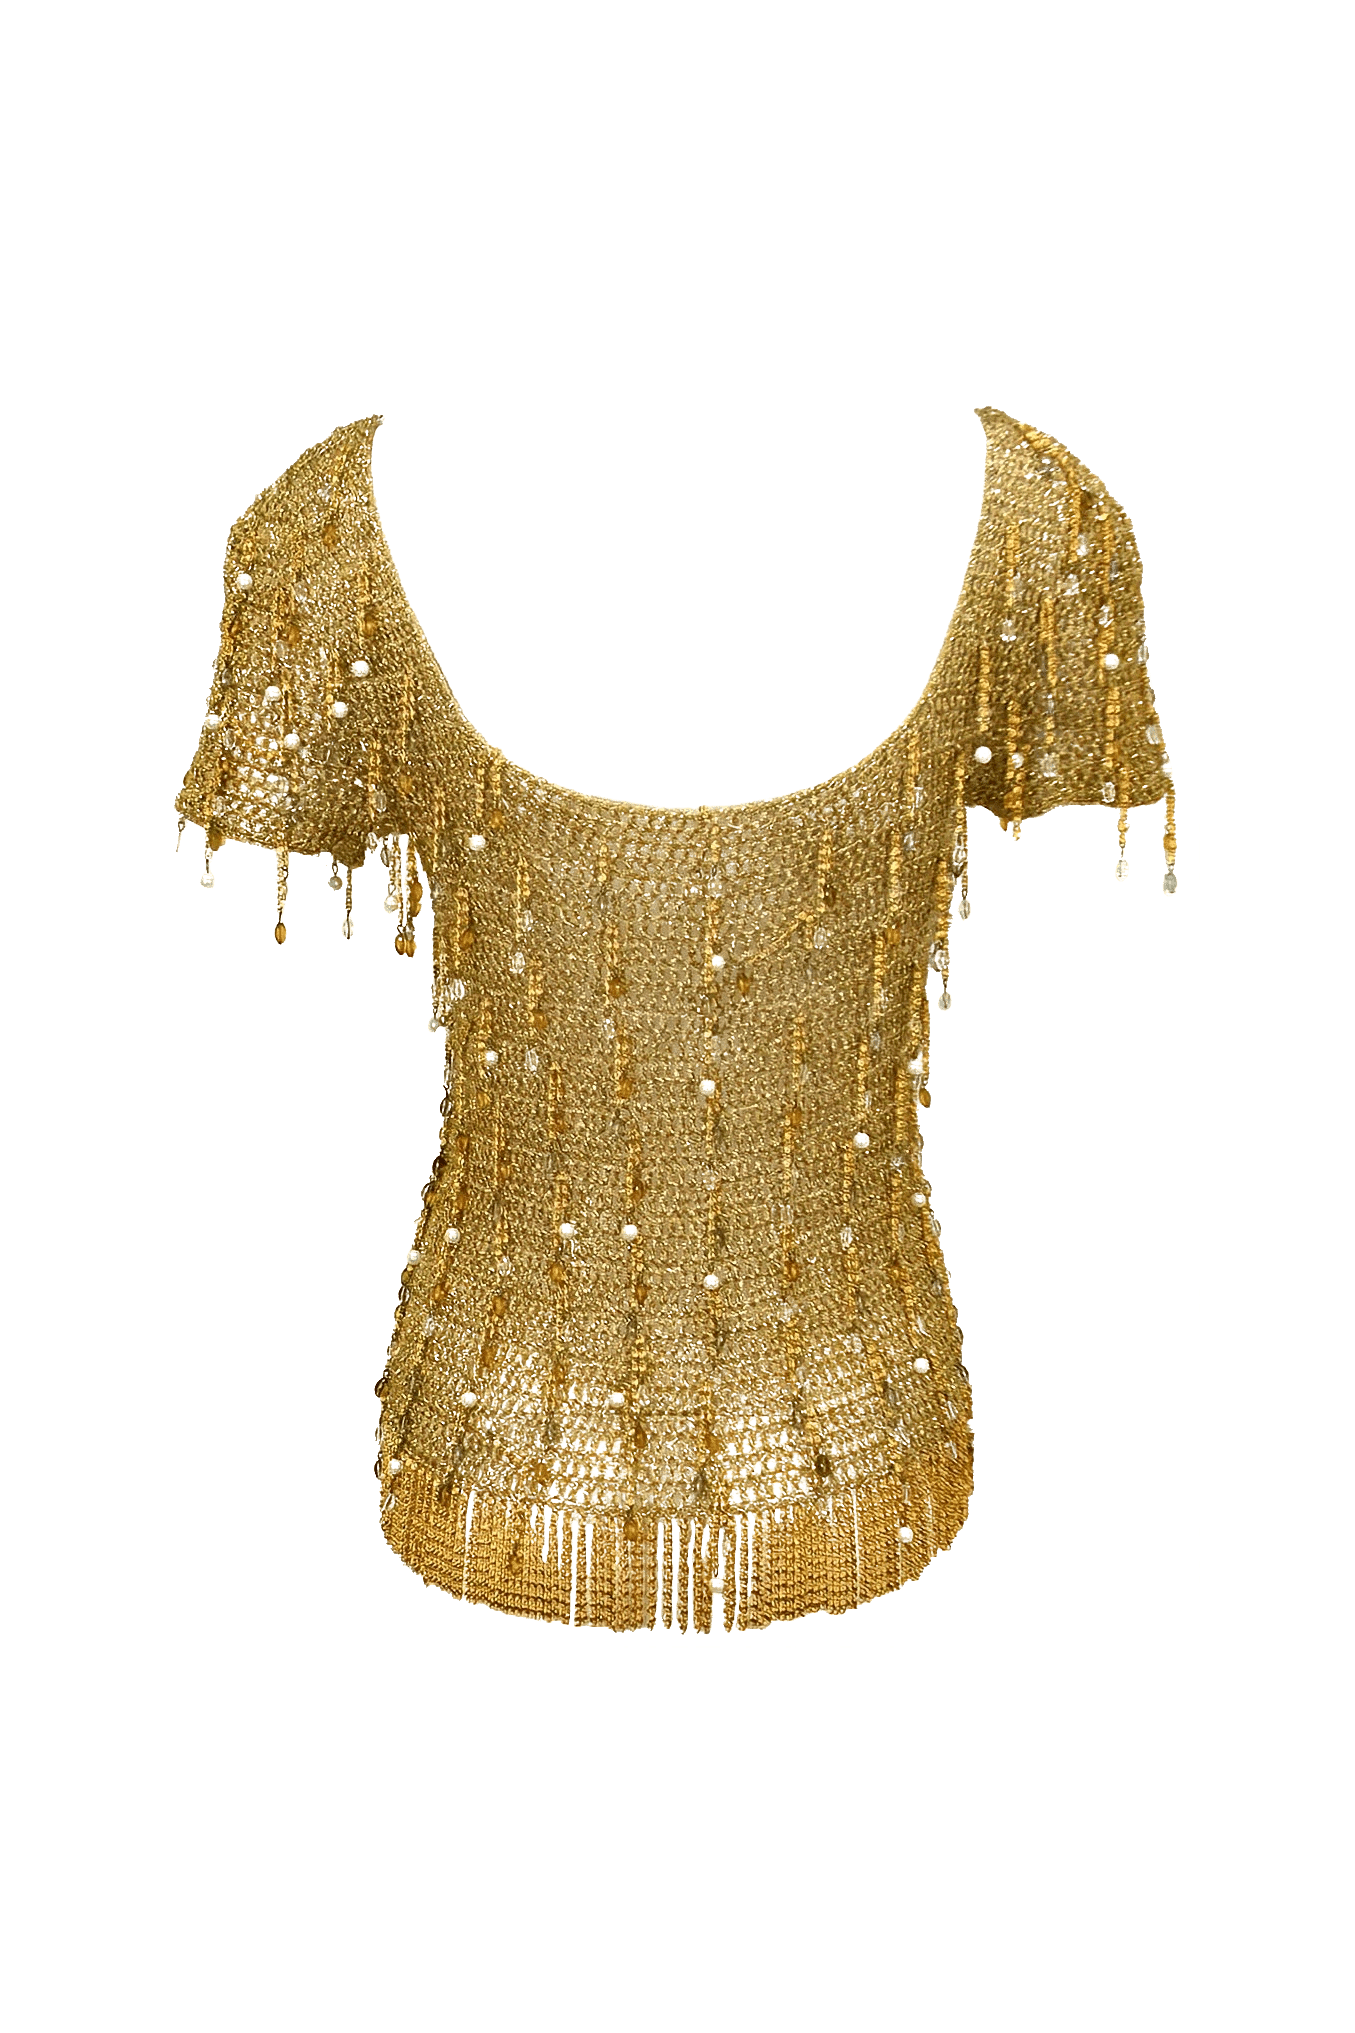 Lorris Azzaro Vintage 1970s Gold Crochet and Chain Top Sz Small